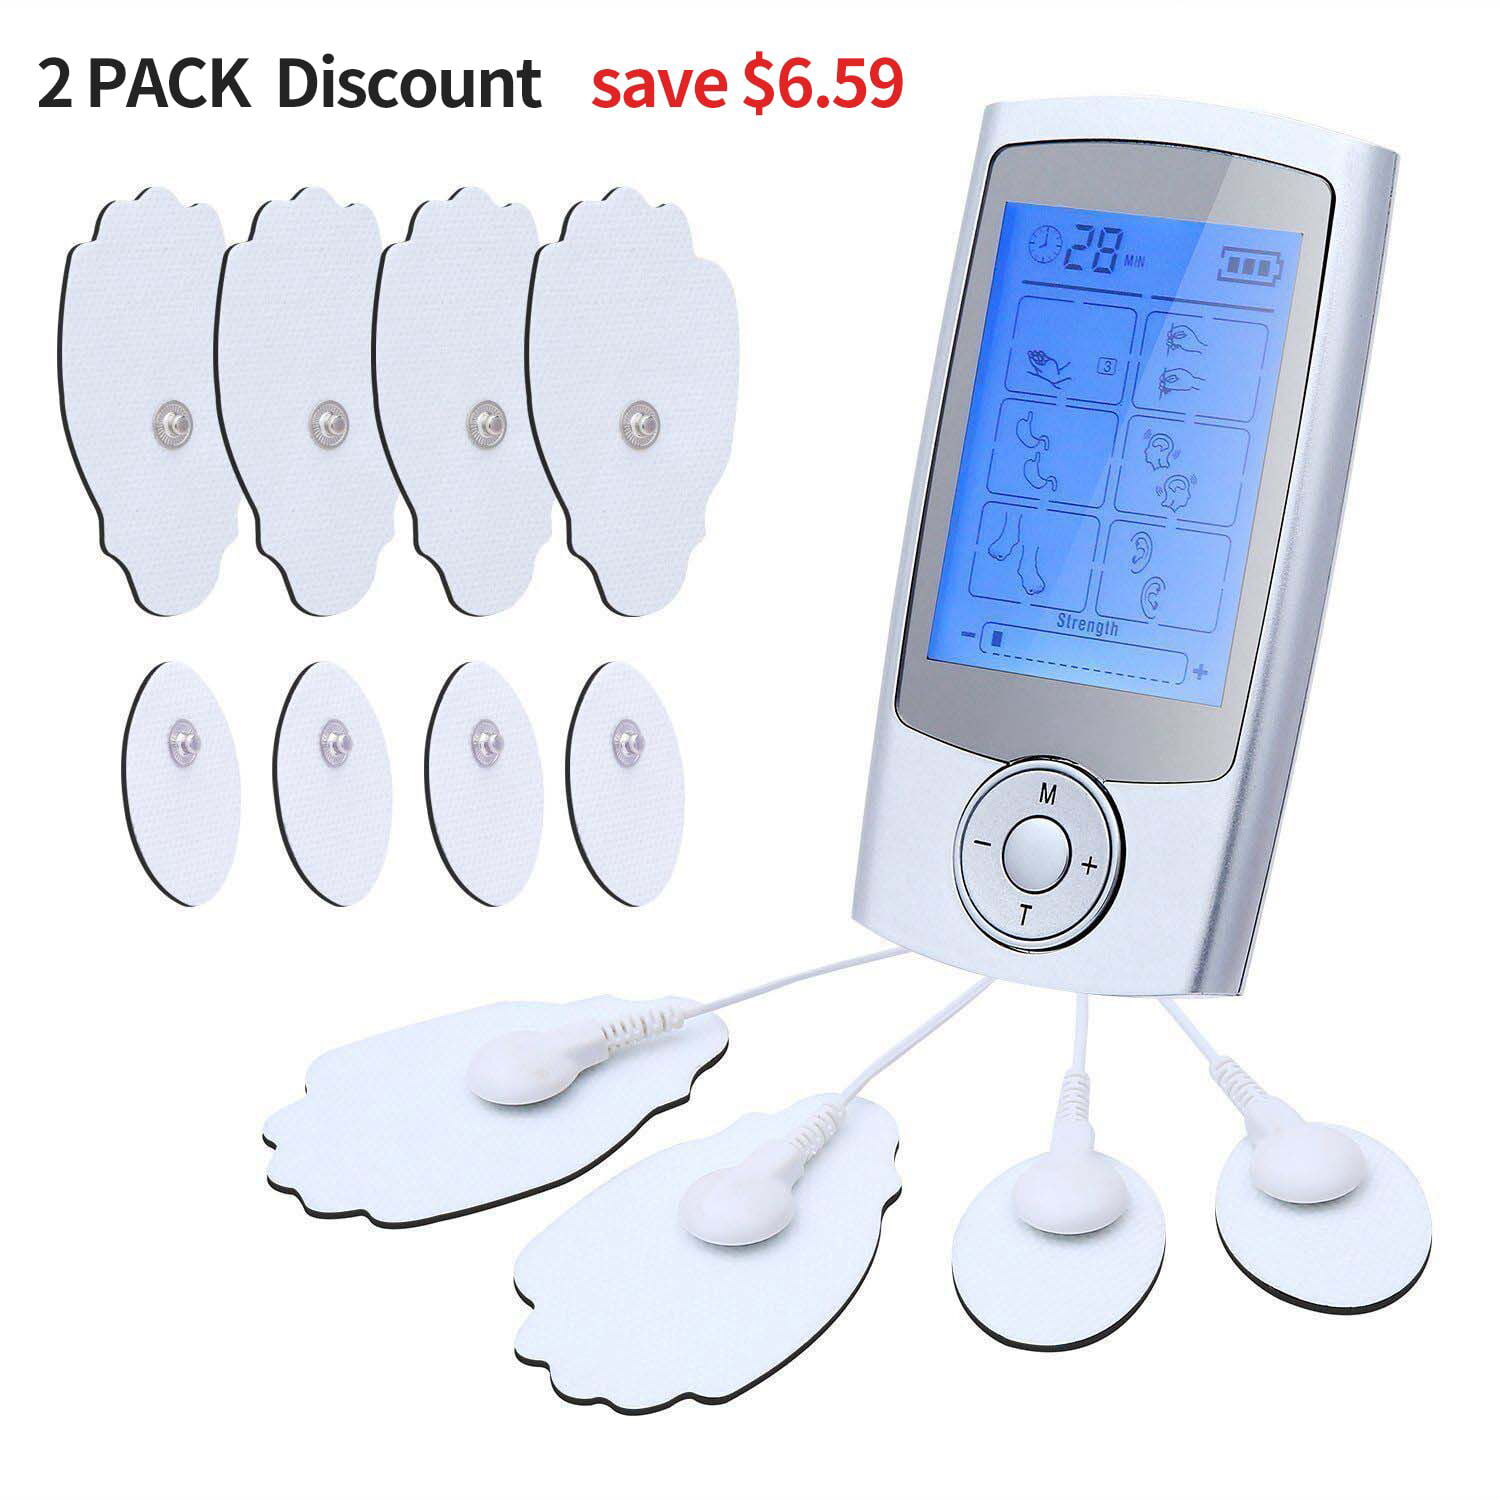 Tens Unit Muscle Stimulator for Pain Management 16 Modes Electro Therapy Pain Relief System with Replacement Pads from TECBOX 2PACK Walmart